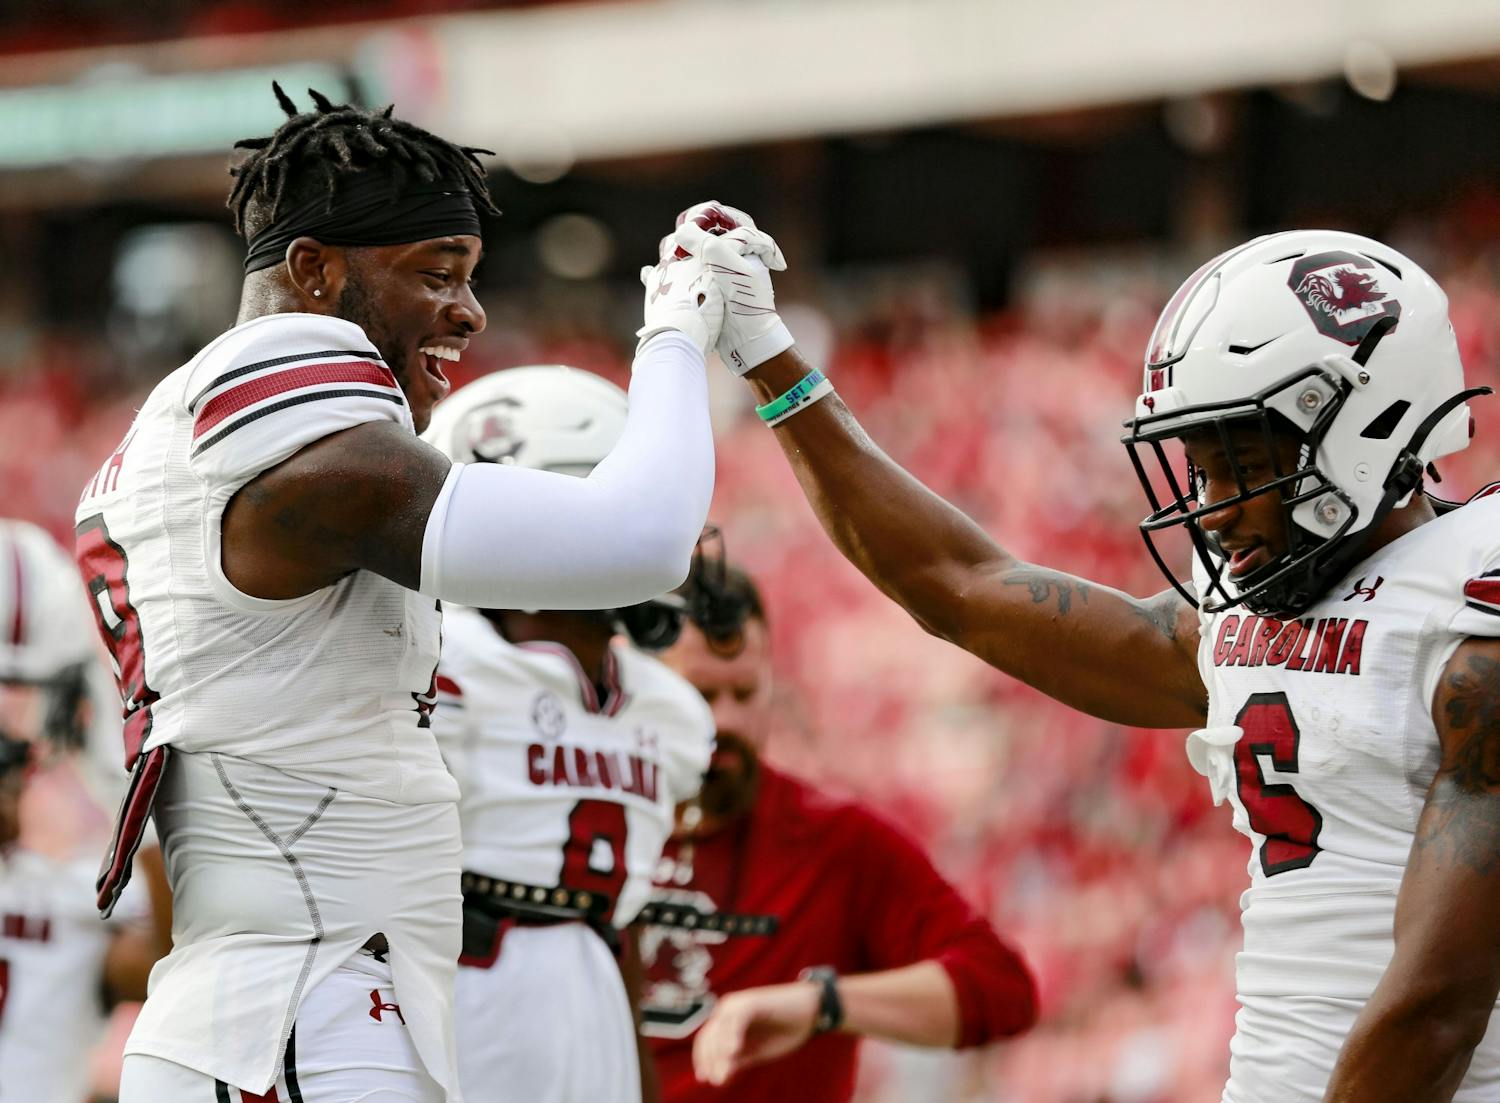 Redshirt sophomore defensive back Cam Smith and fifth-year wide receiver Josh Vann have fun before South Carolina's game against Georgia on Sept. 18, 2021.